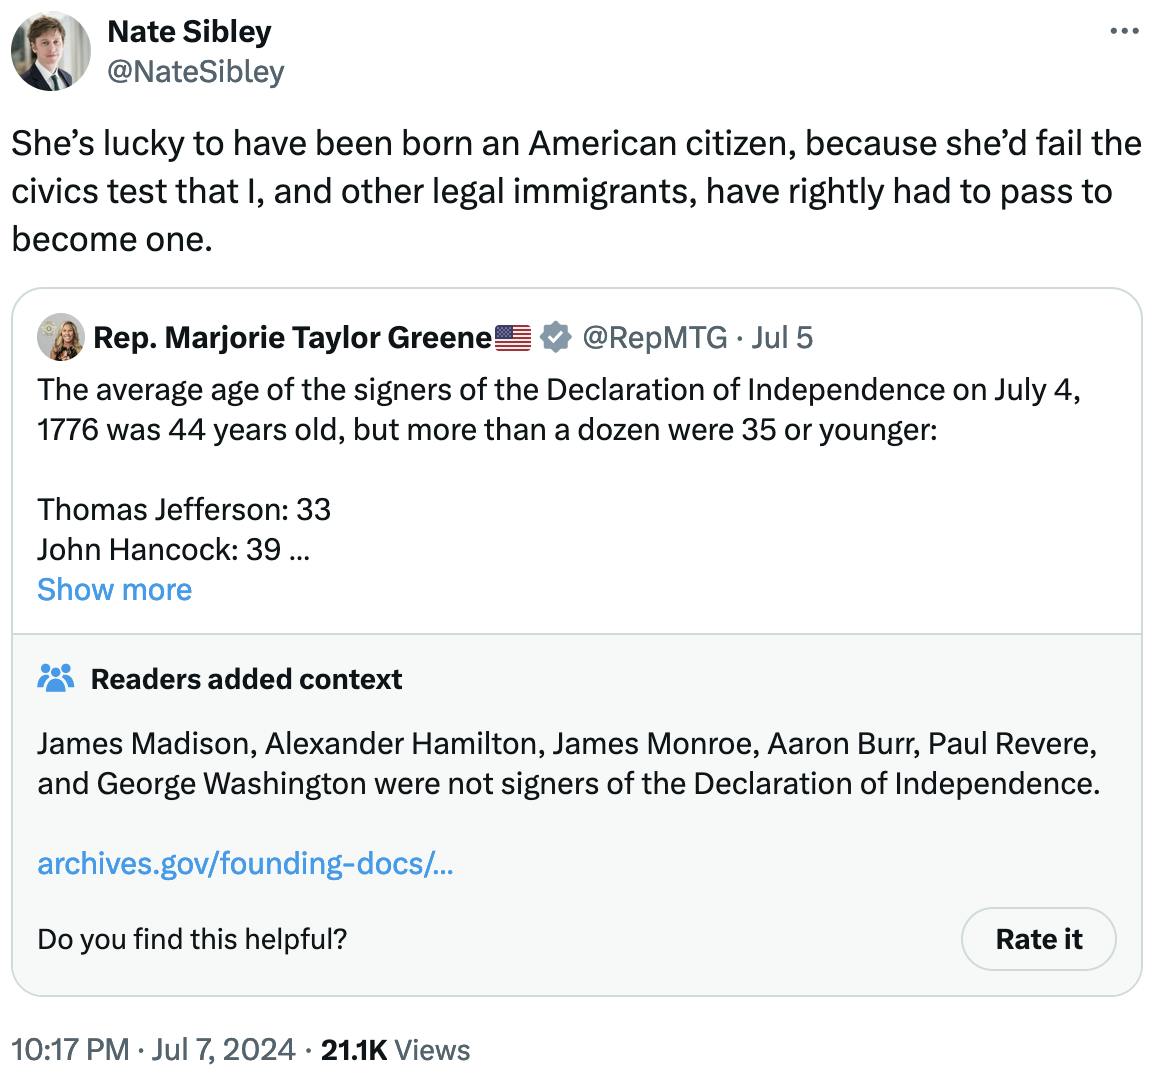 Tweet screenshot Nate Sibley @NateSibley: She’s lucky to have been born an American citizen, because she’d fail the civics test that I, and other legal immigrants, have rightly had to pass to become one.